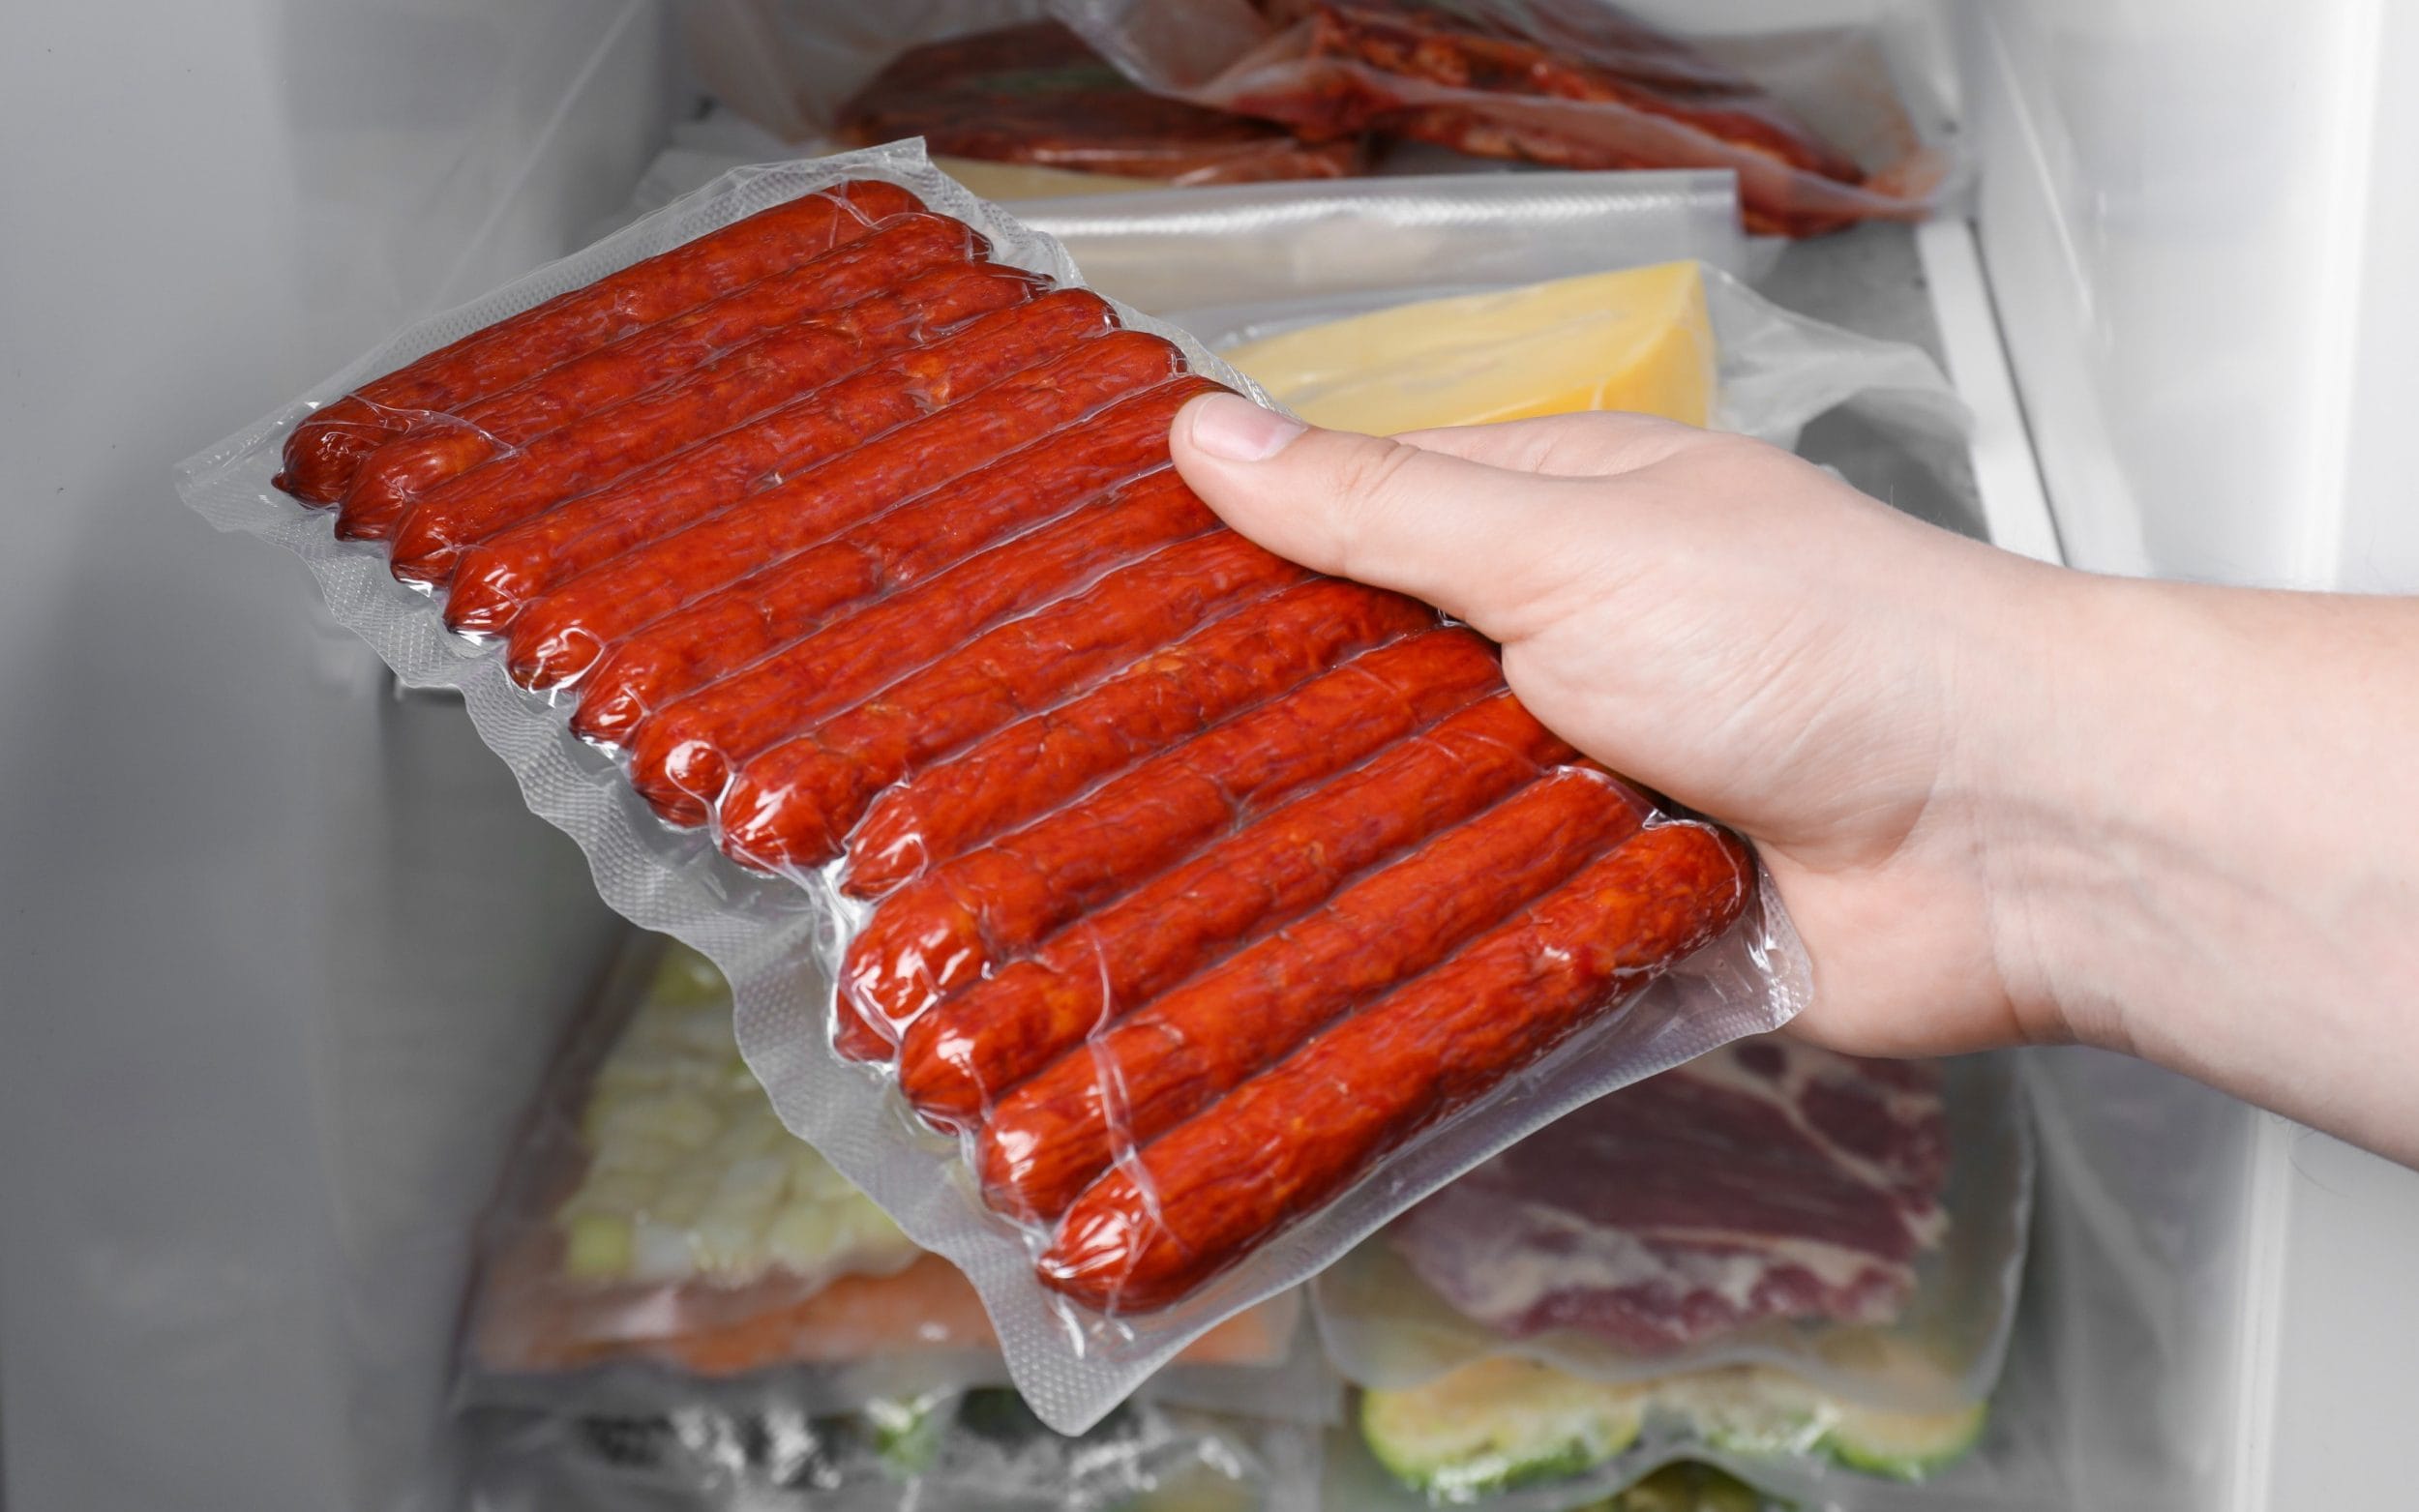 eating ultra-processed meat linked to greater risk of early death